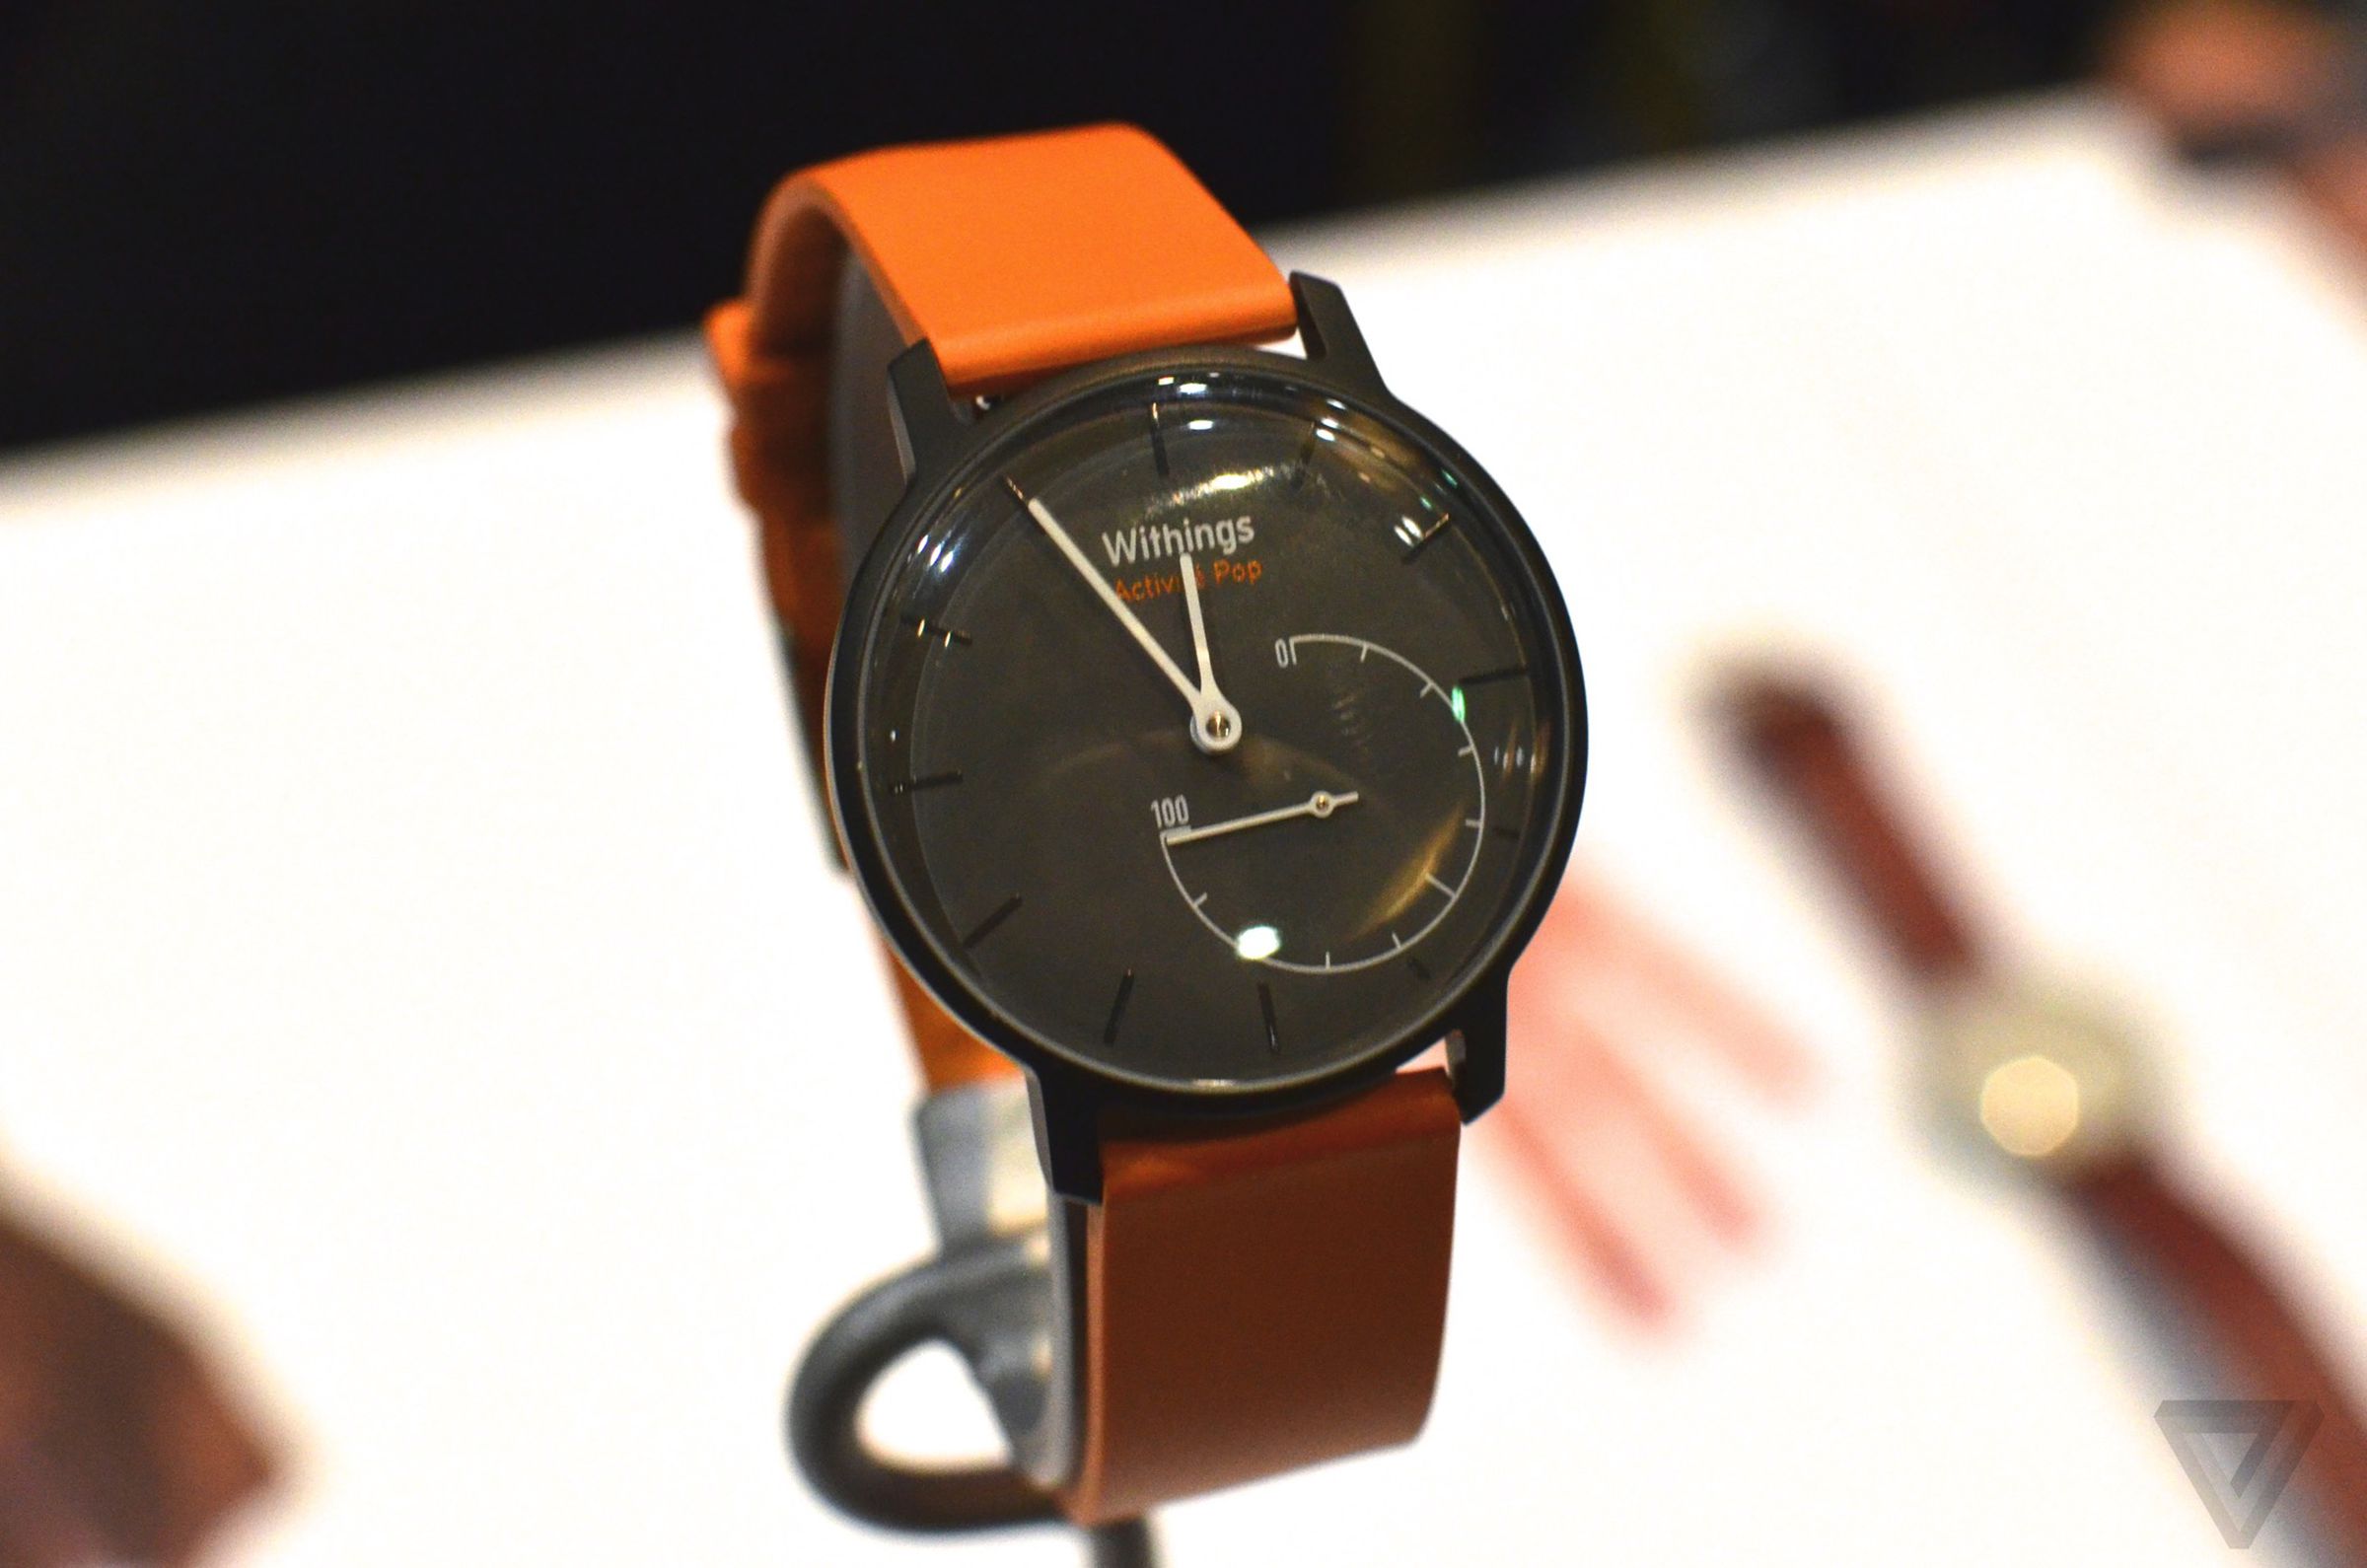 Withings Activité Pop hands-on images